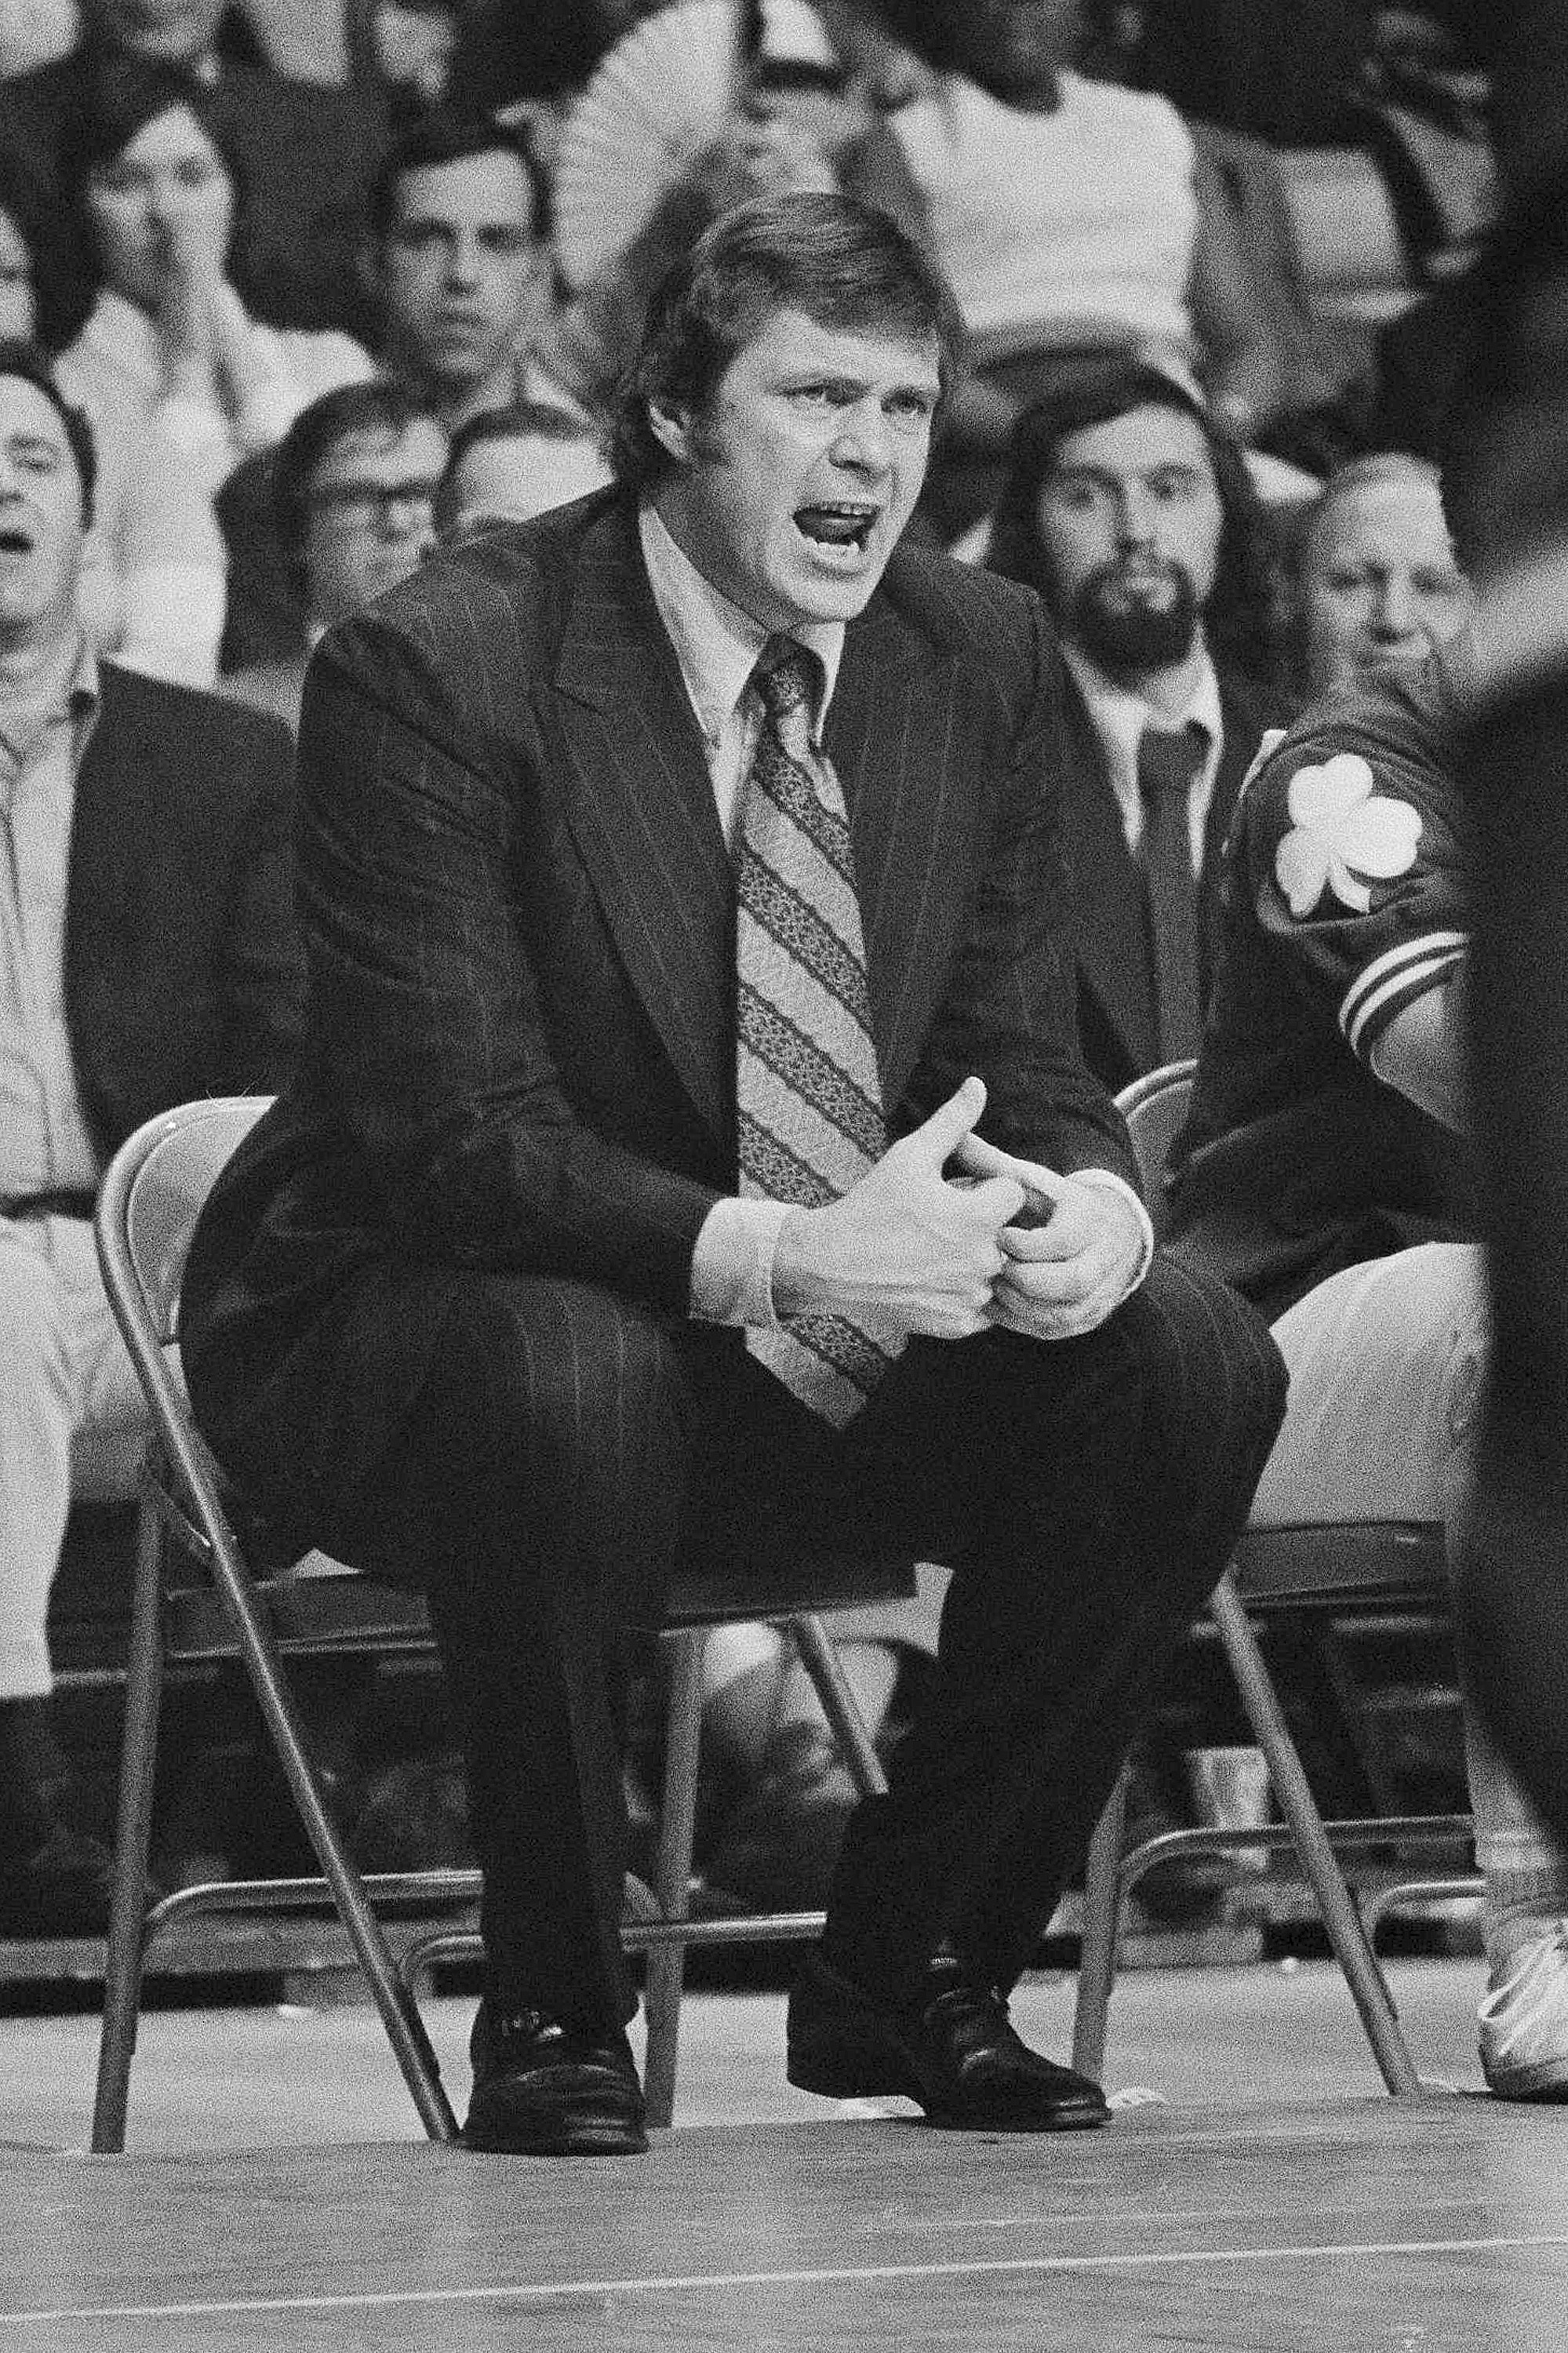 He hasn't just seen Celtics history, he is Celtics history: A chat with  Tommy Heinsohn